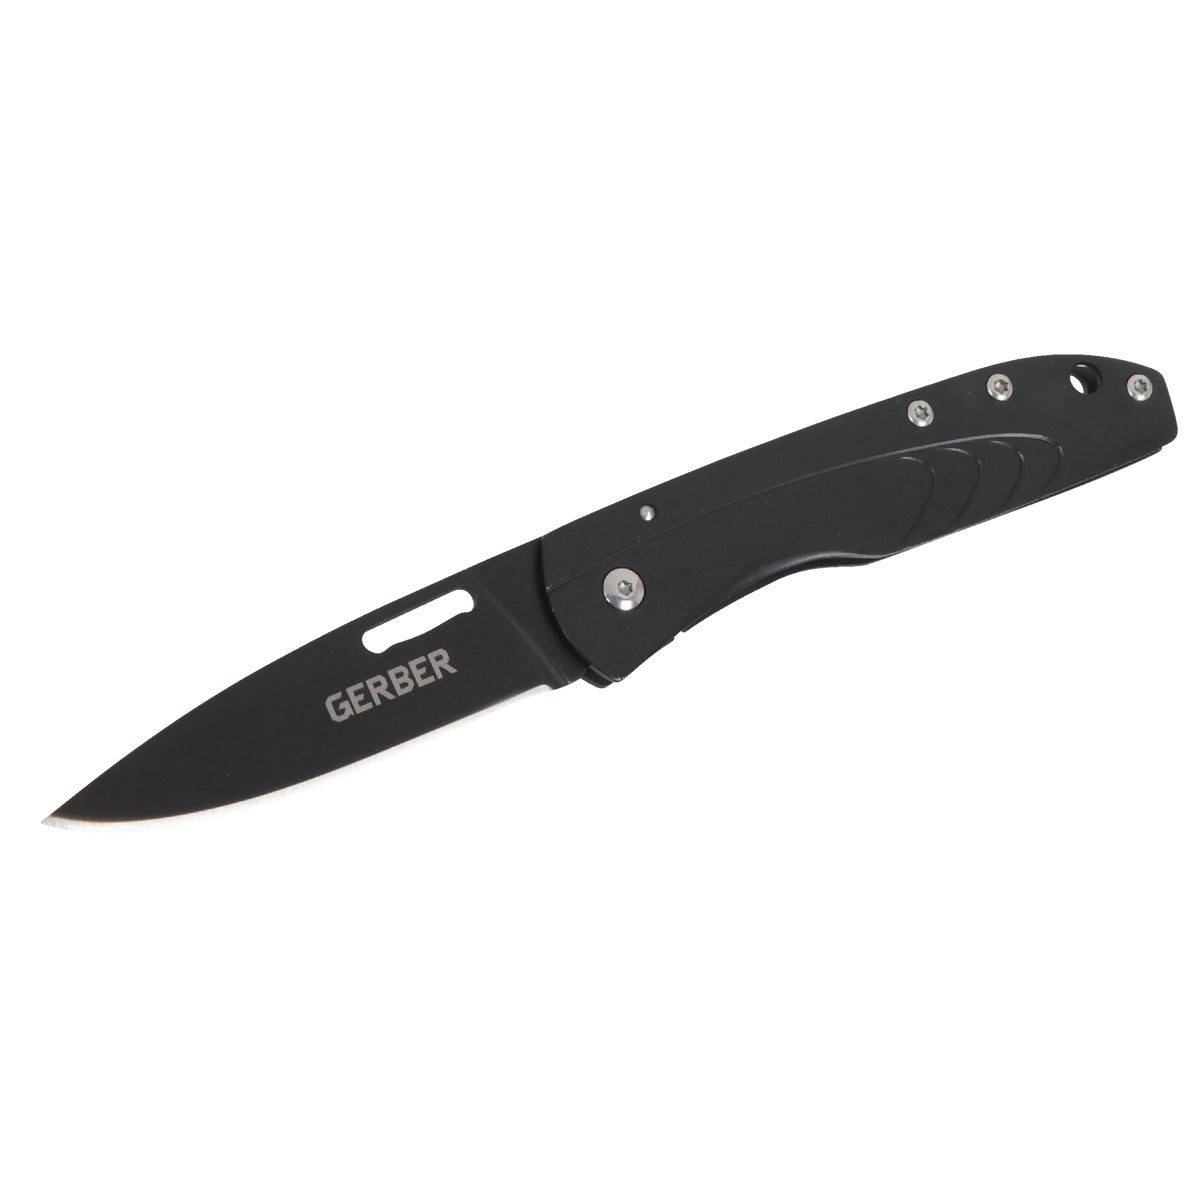 Item 800883, Folding knife featuring a stainless steel fine edge, drop point blade.